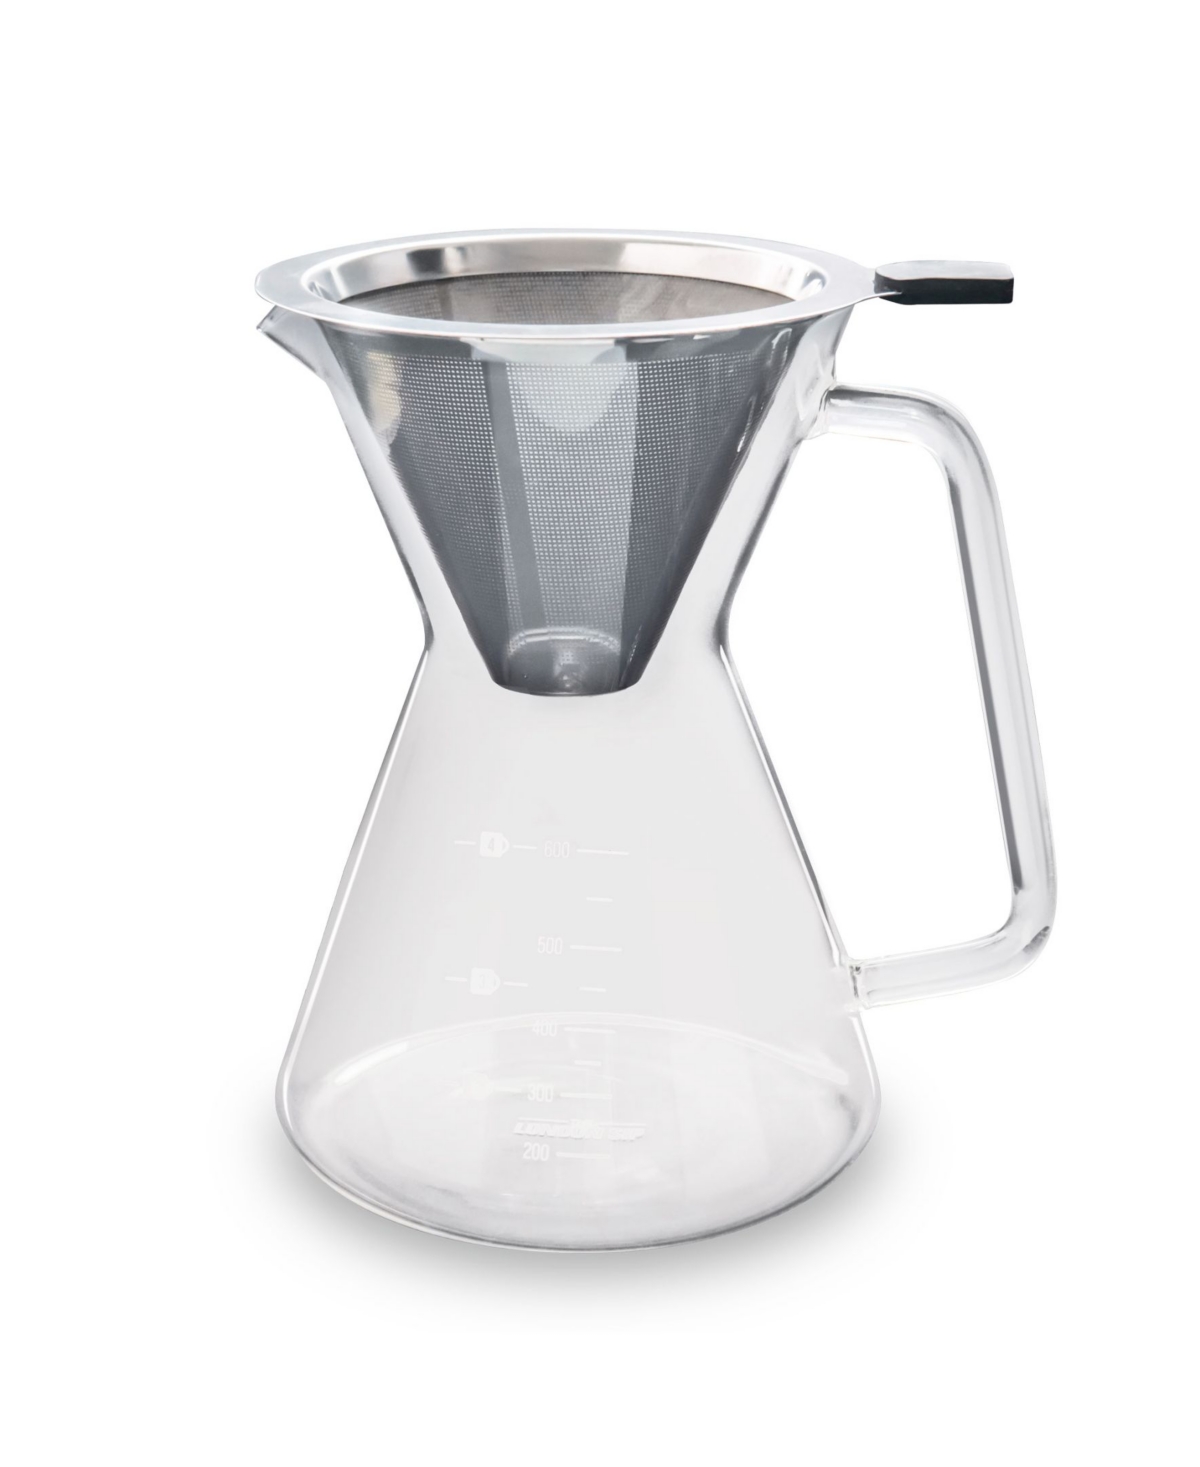 London Sip Glass Pour Over Carafe With Filter, 600ml In Silver